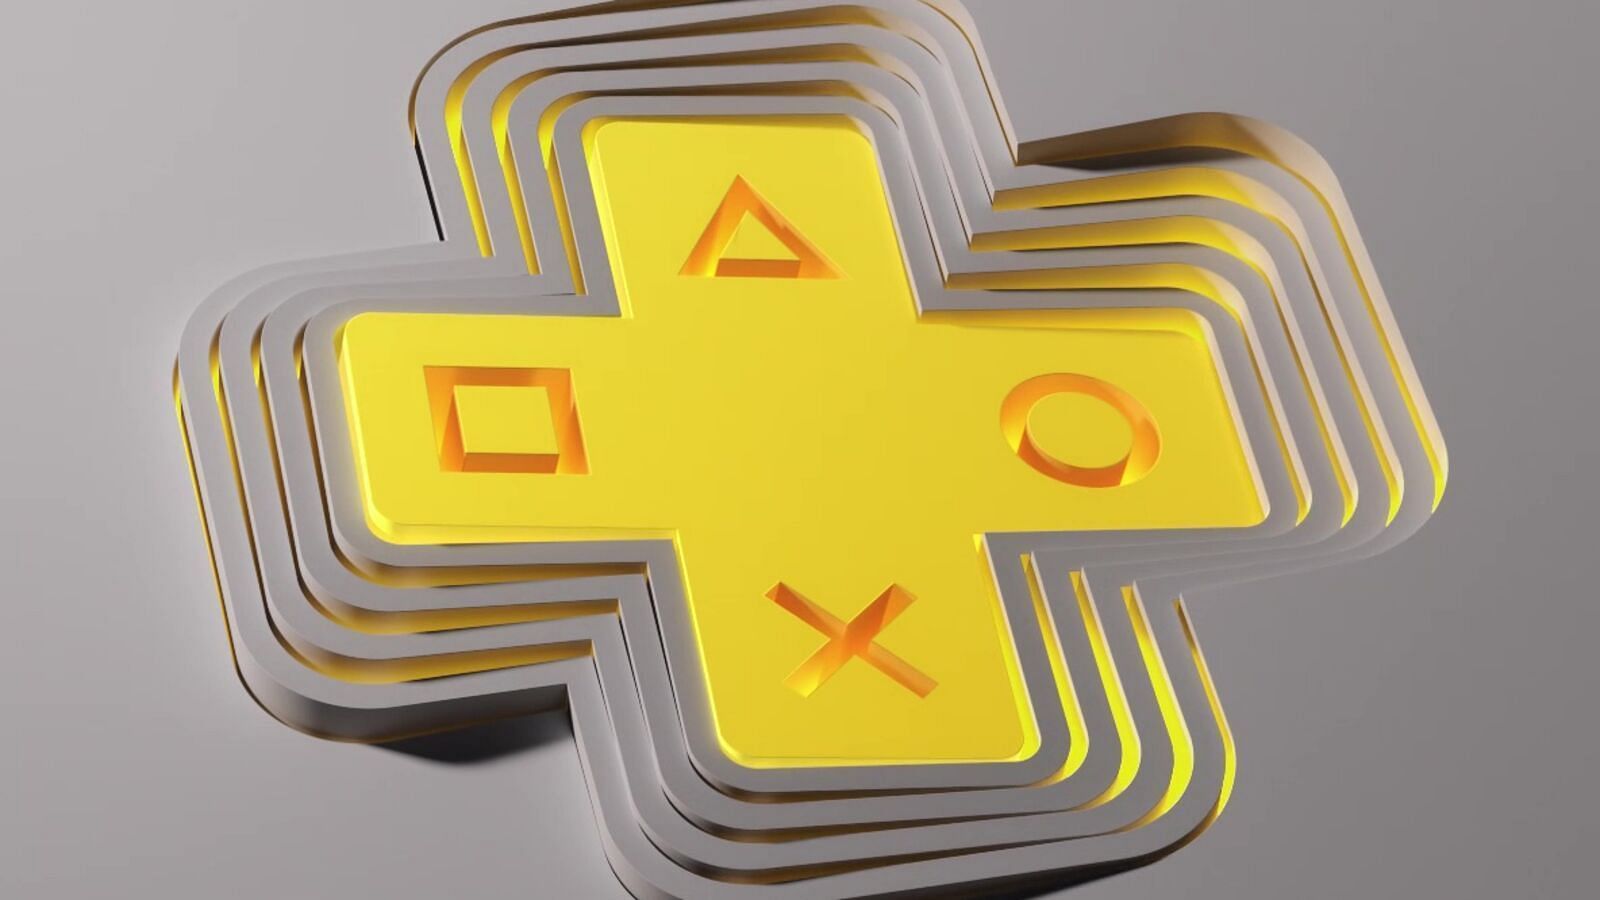 PlayStation Plus Deluxe, Extra, and Essential tiers explained How to